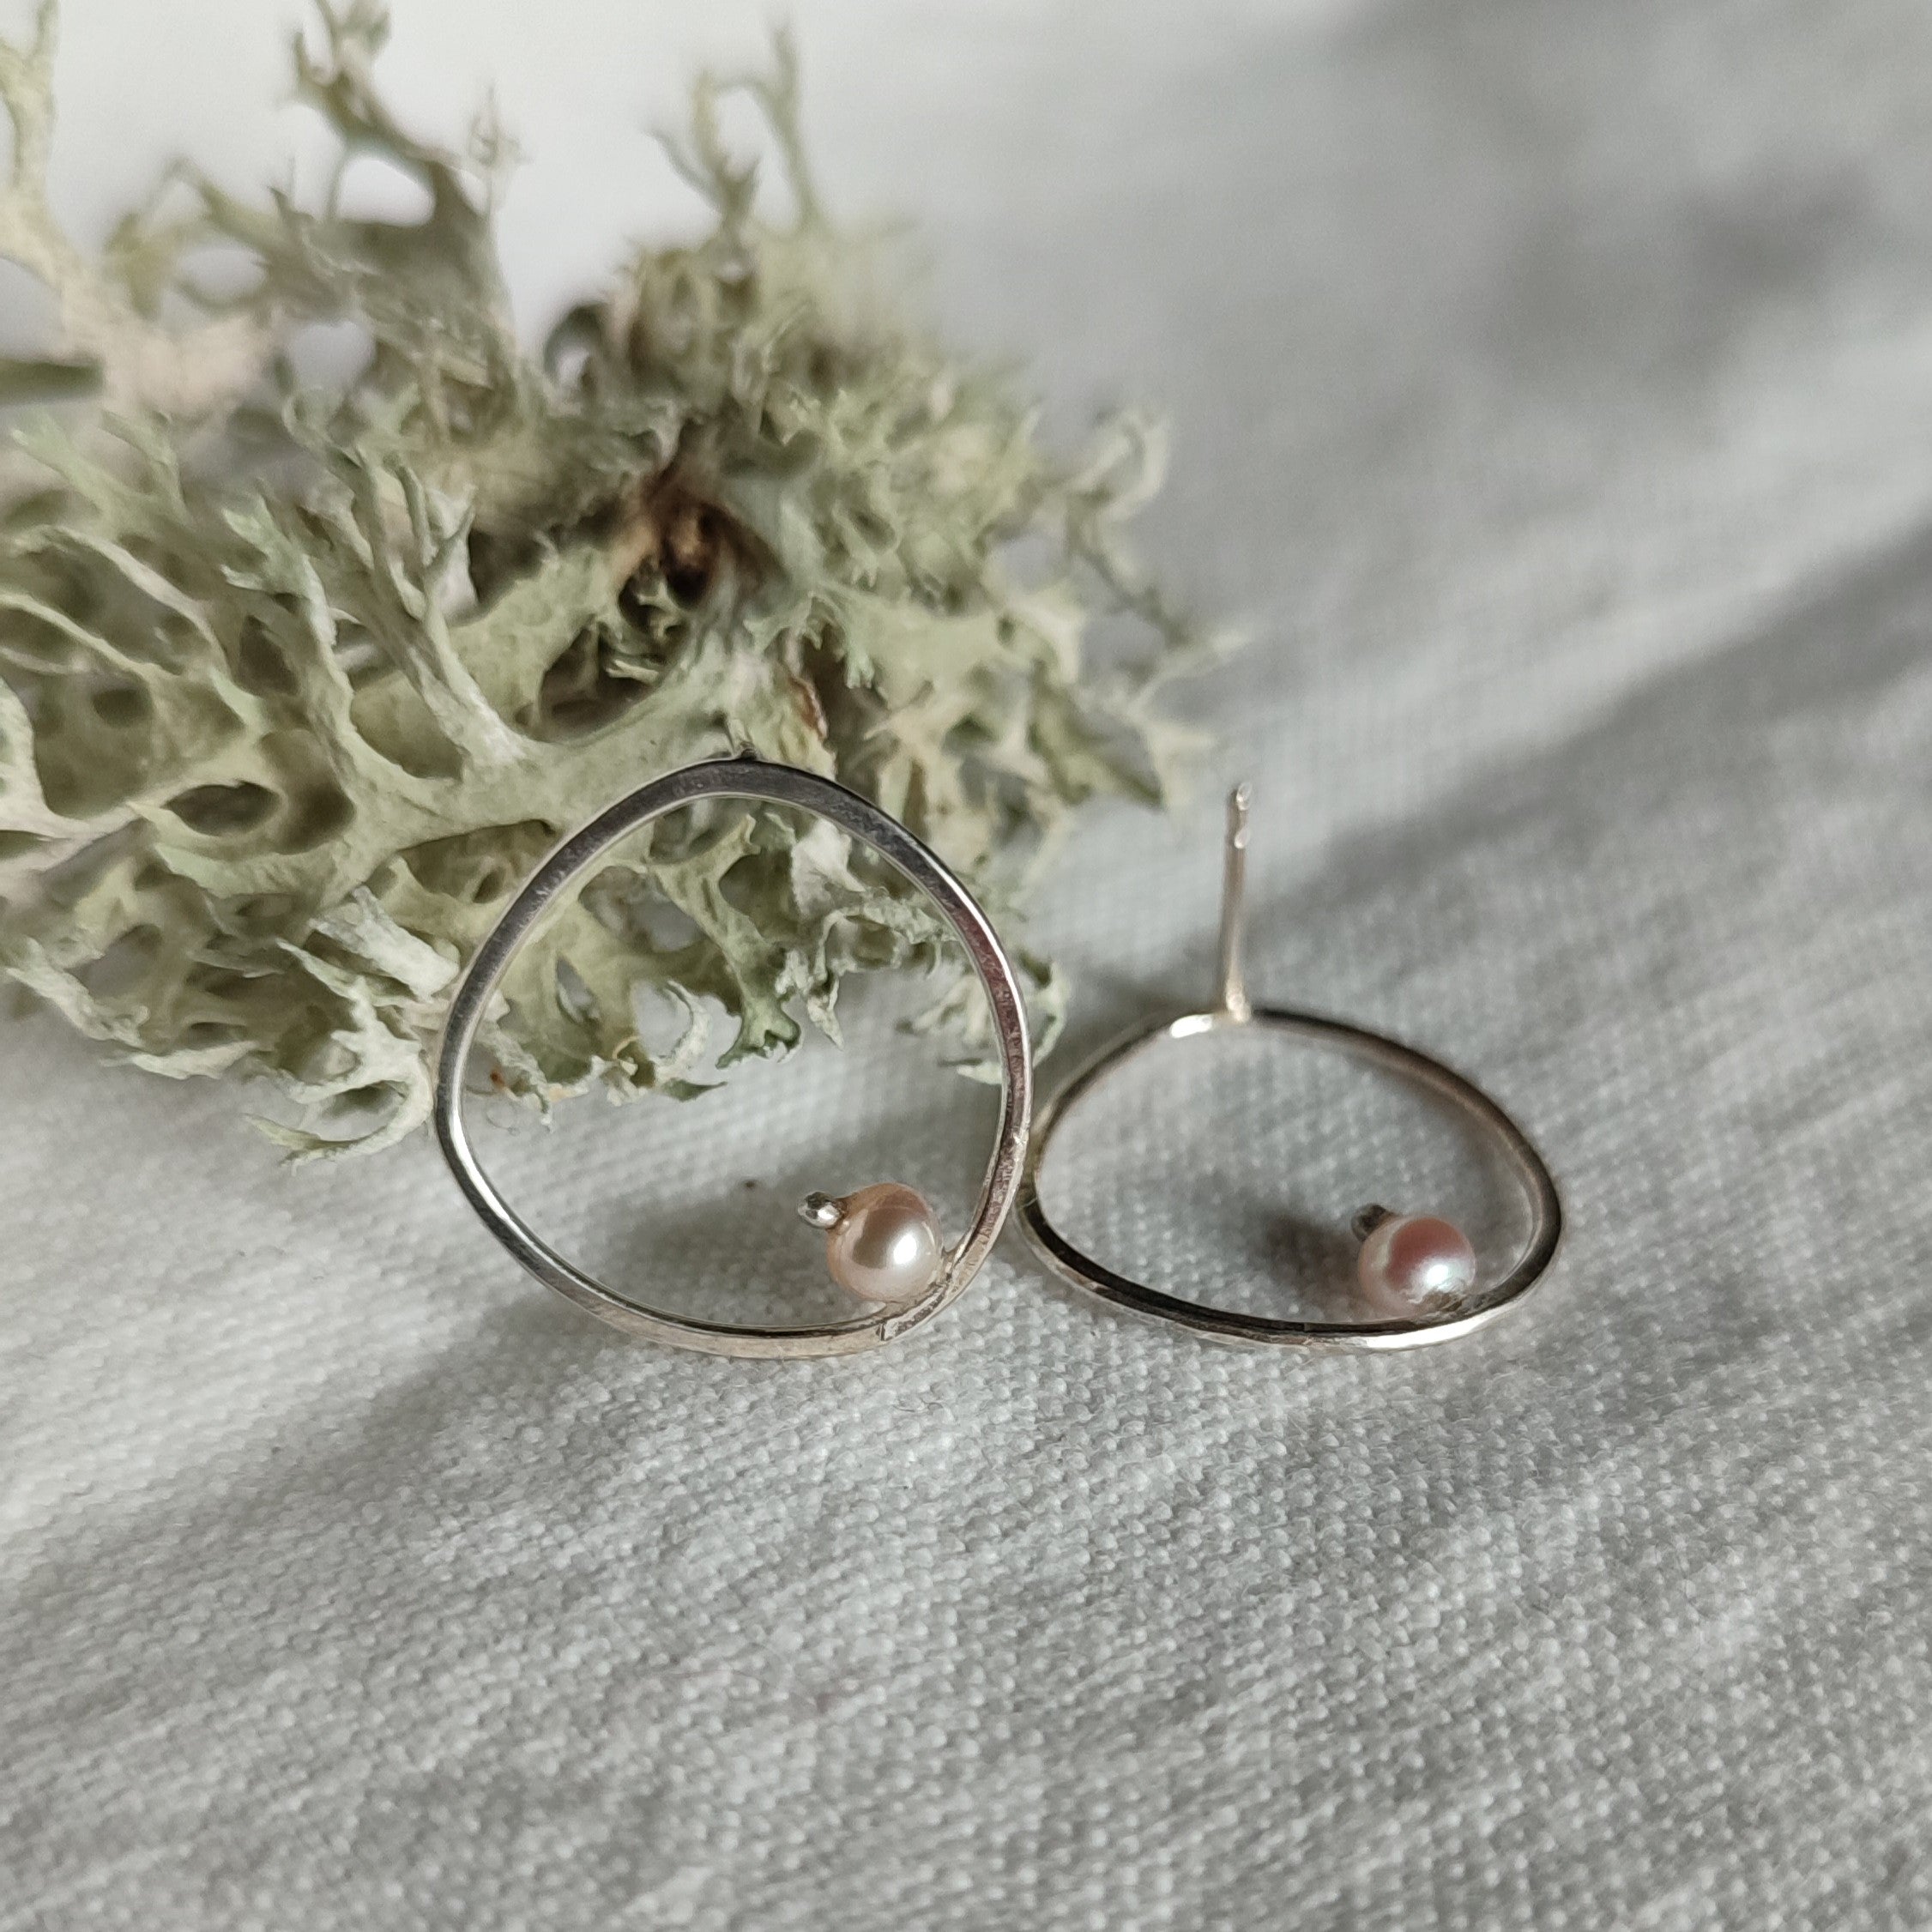 A pair of handcrafted silver earrings with pearls